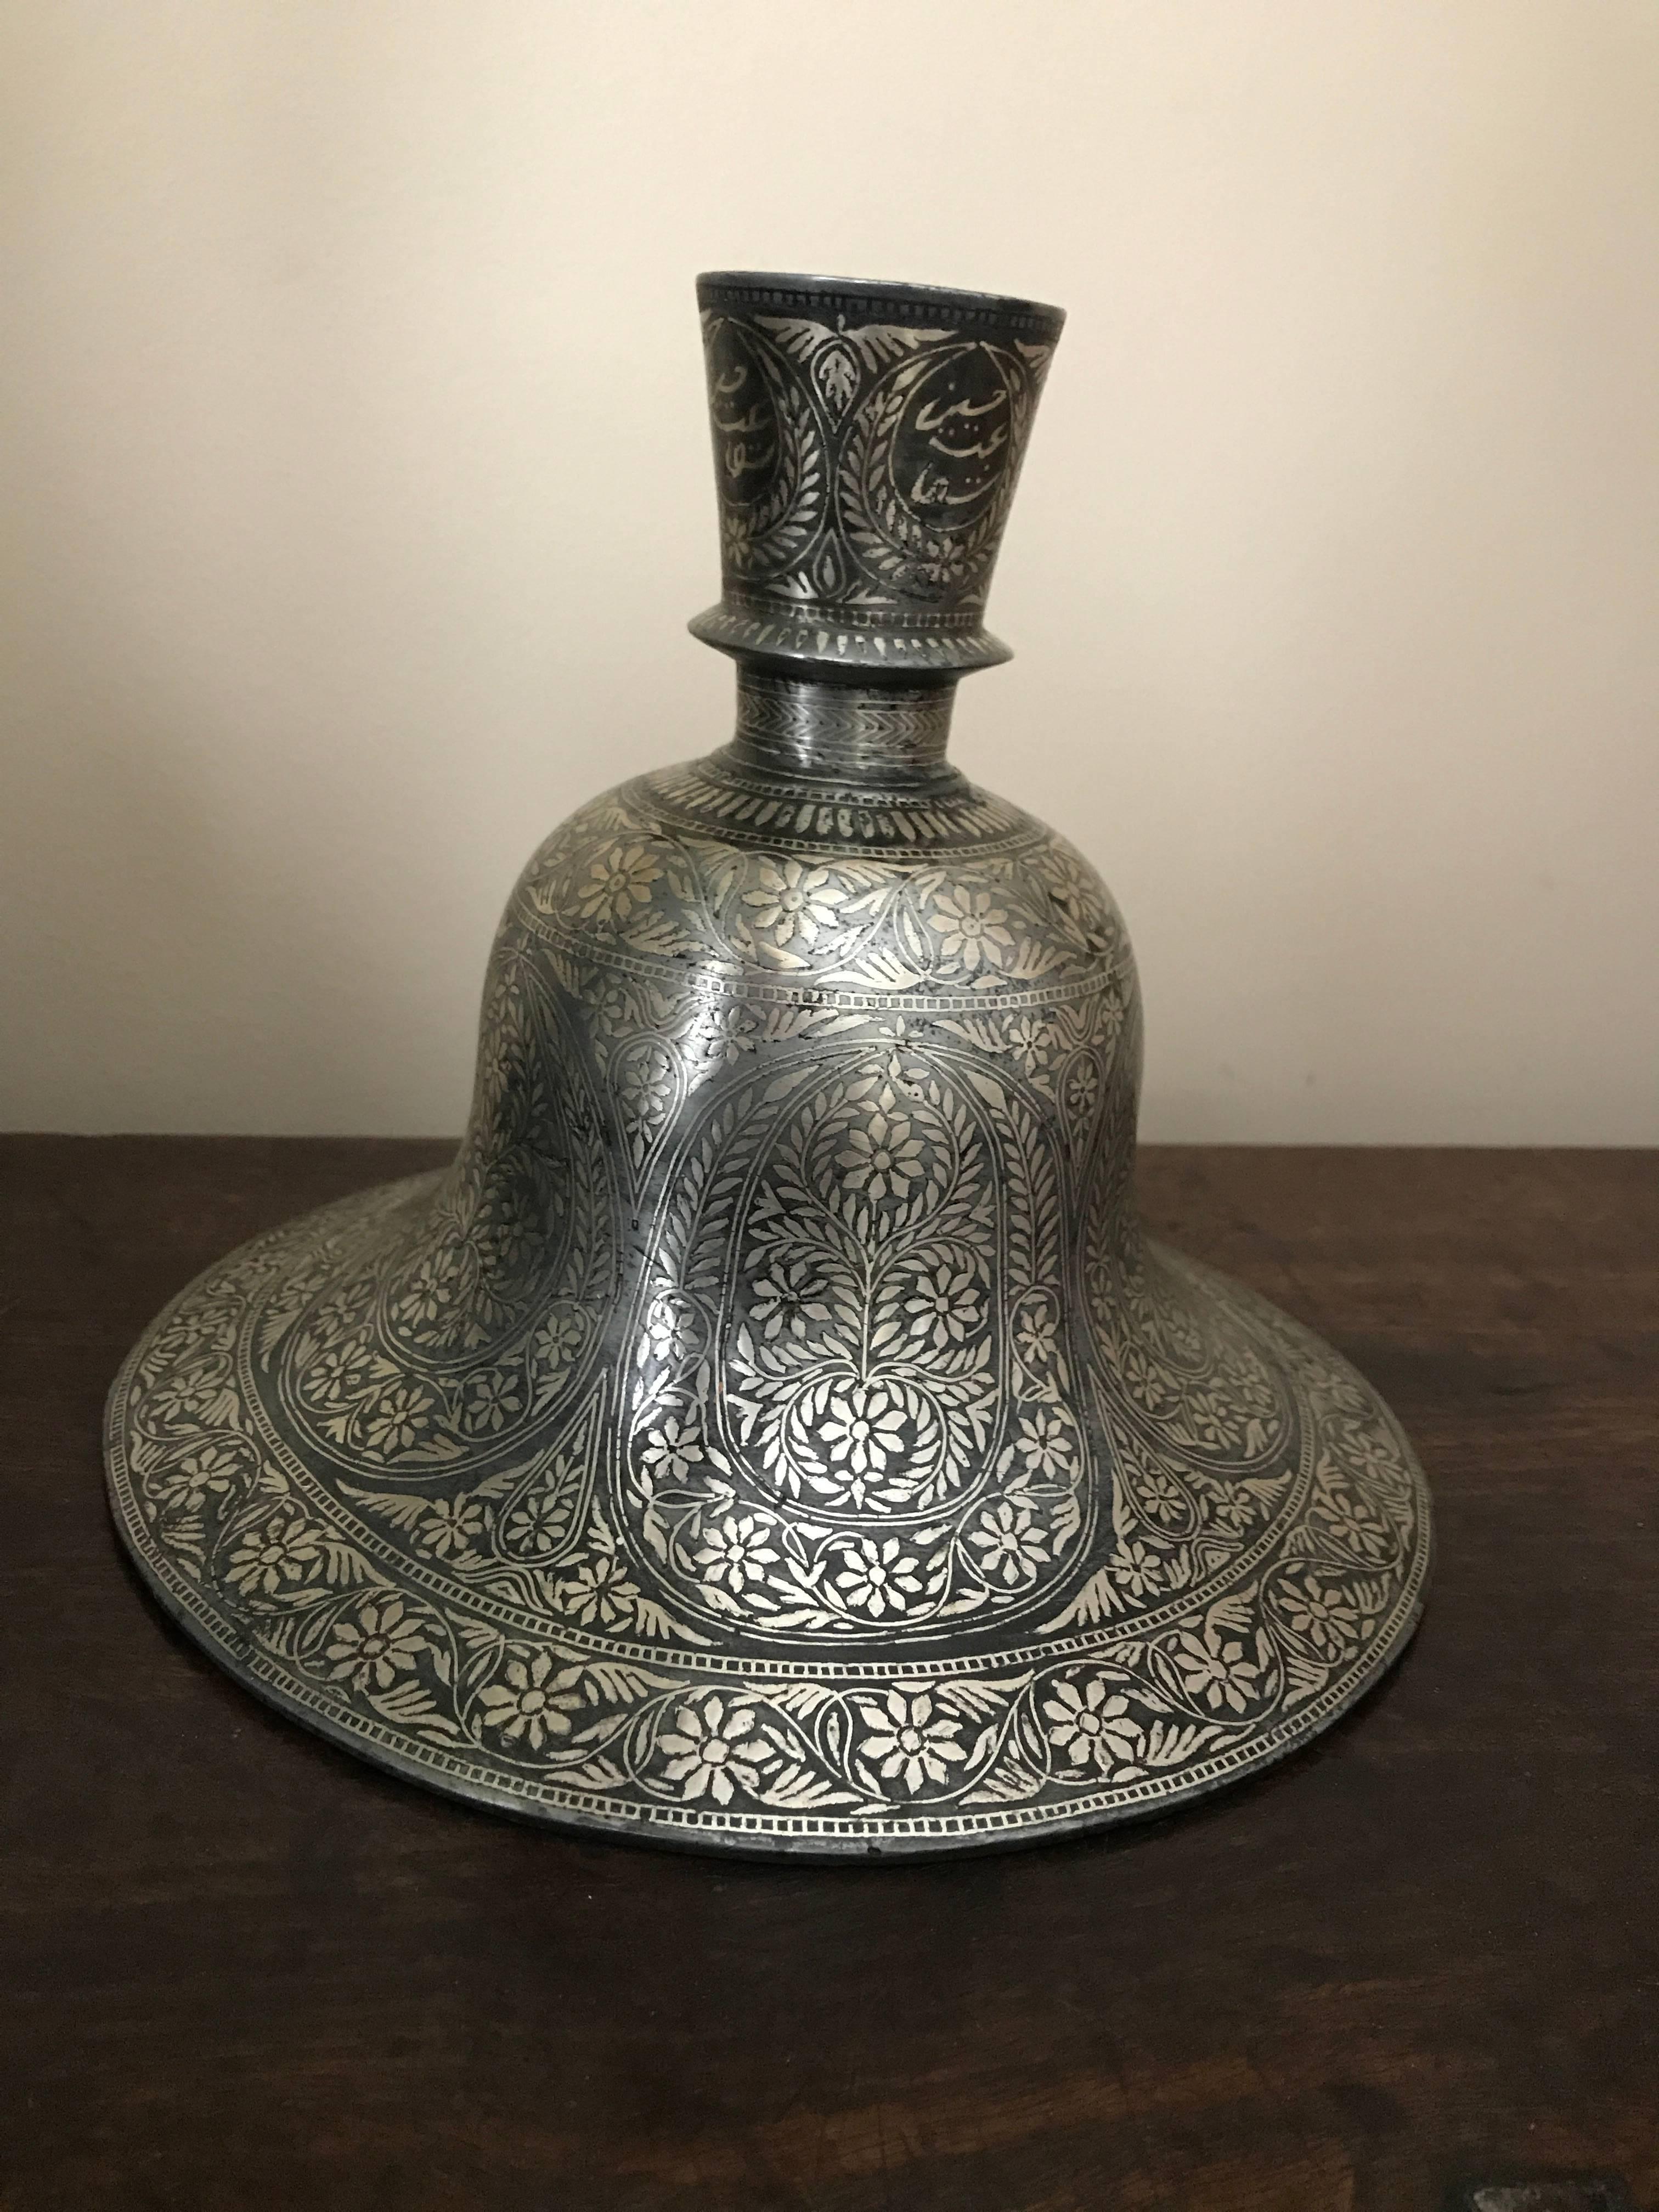 This bidri hookah base is cast in an elegant bell form, with a round, flared neck with a collar, and is decorated overall with an intricate floral pattern in inlaid silver. A huqqa or hookah is a traditional water pipe, smoking instrument